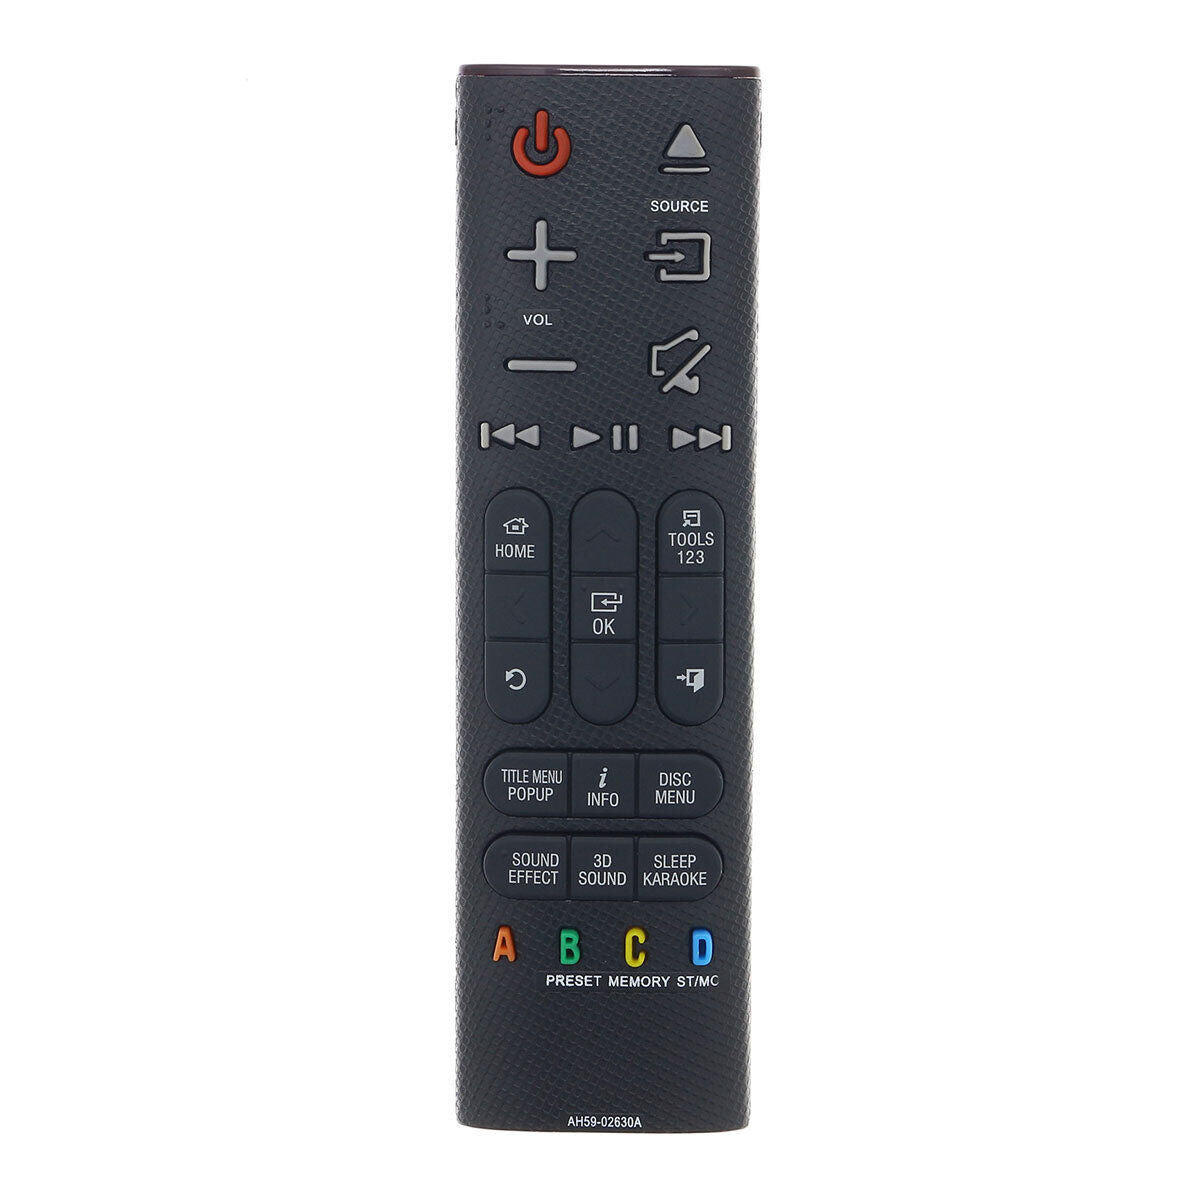 New Remote AH59-02630A for Samsung Home Theater HT-H6500WM HT-H7730WM